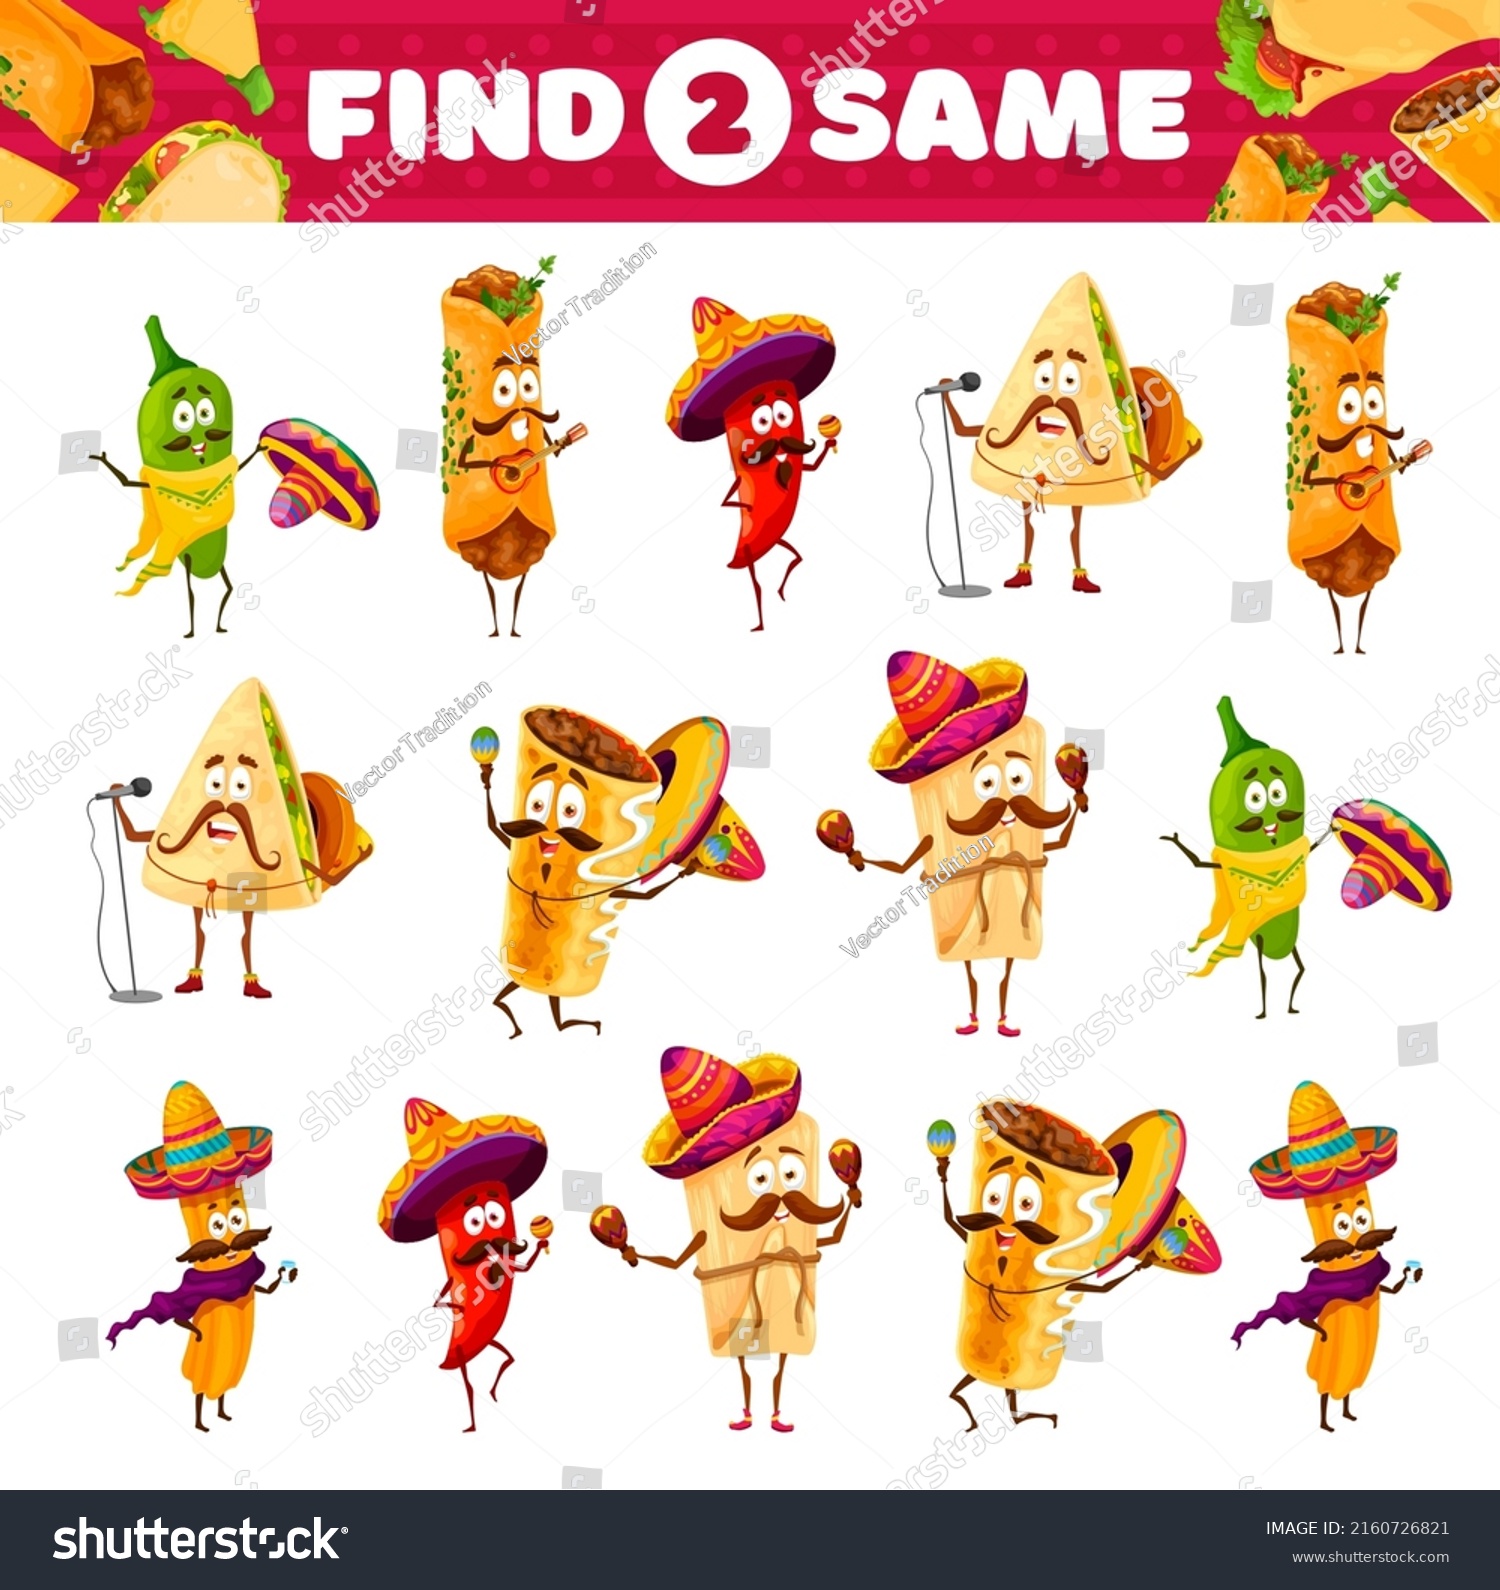 SVG of Cartoon funny mexican food characters, find two same tex mex personages. Vector jalapeno, burrito, enchiladas, chilli pepper, tamales and chimichanga or churros mariachi artists educational riddle svg